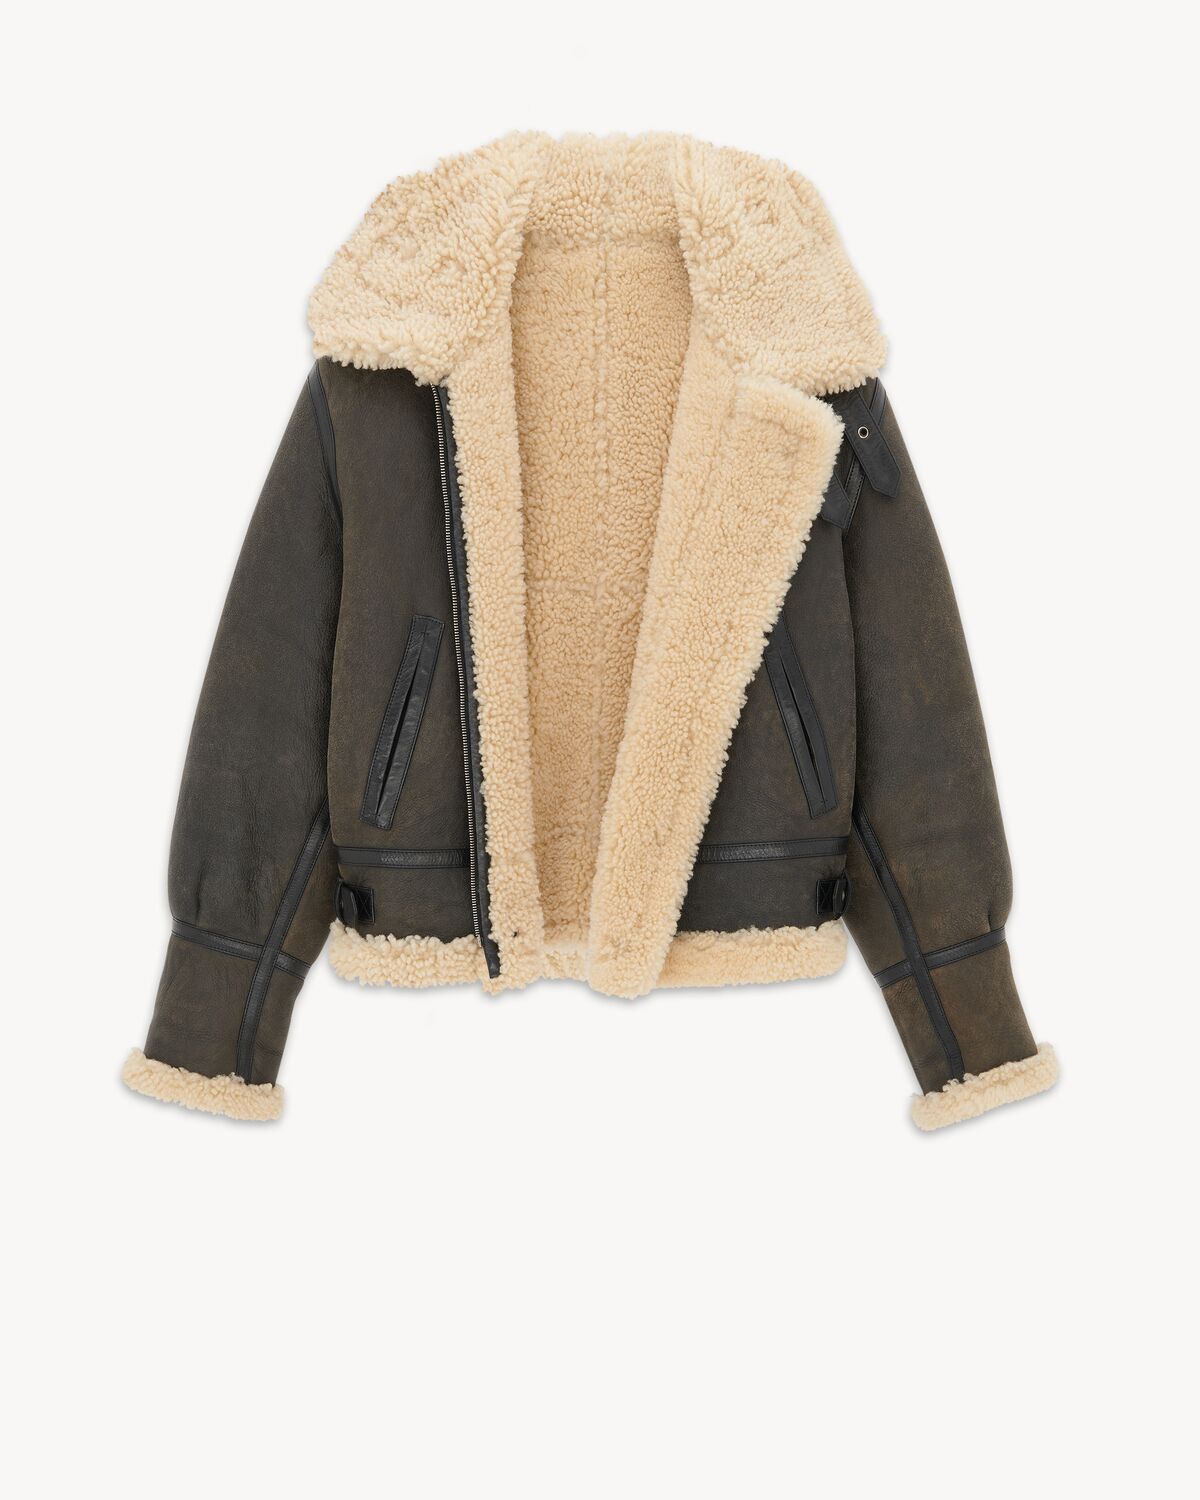 aviator jacket in aged leather and shearling